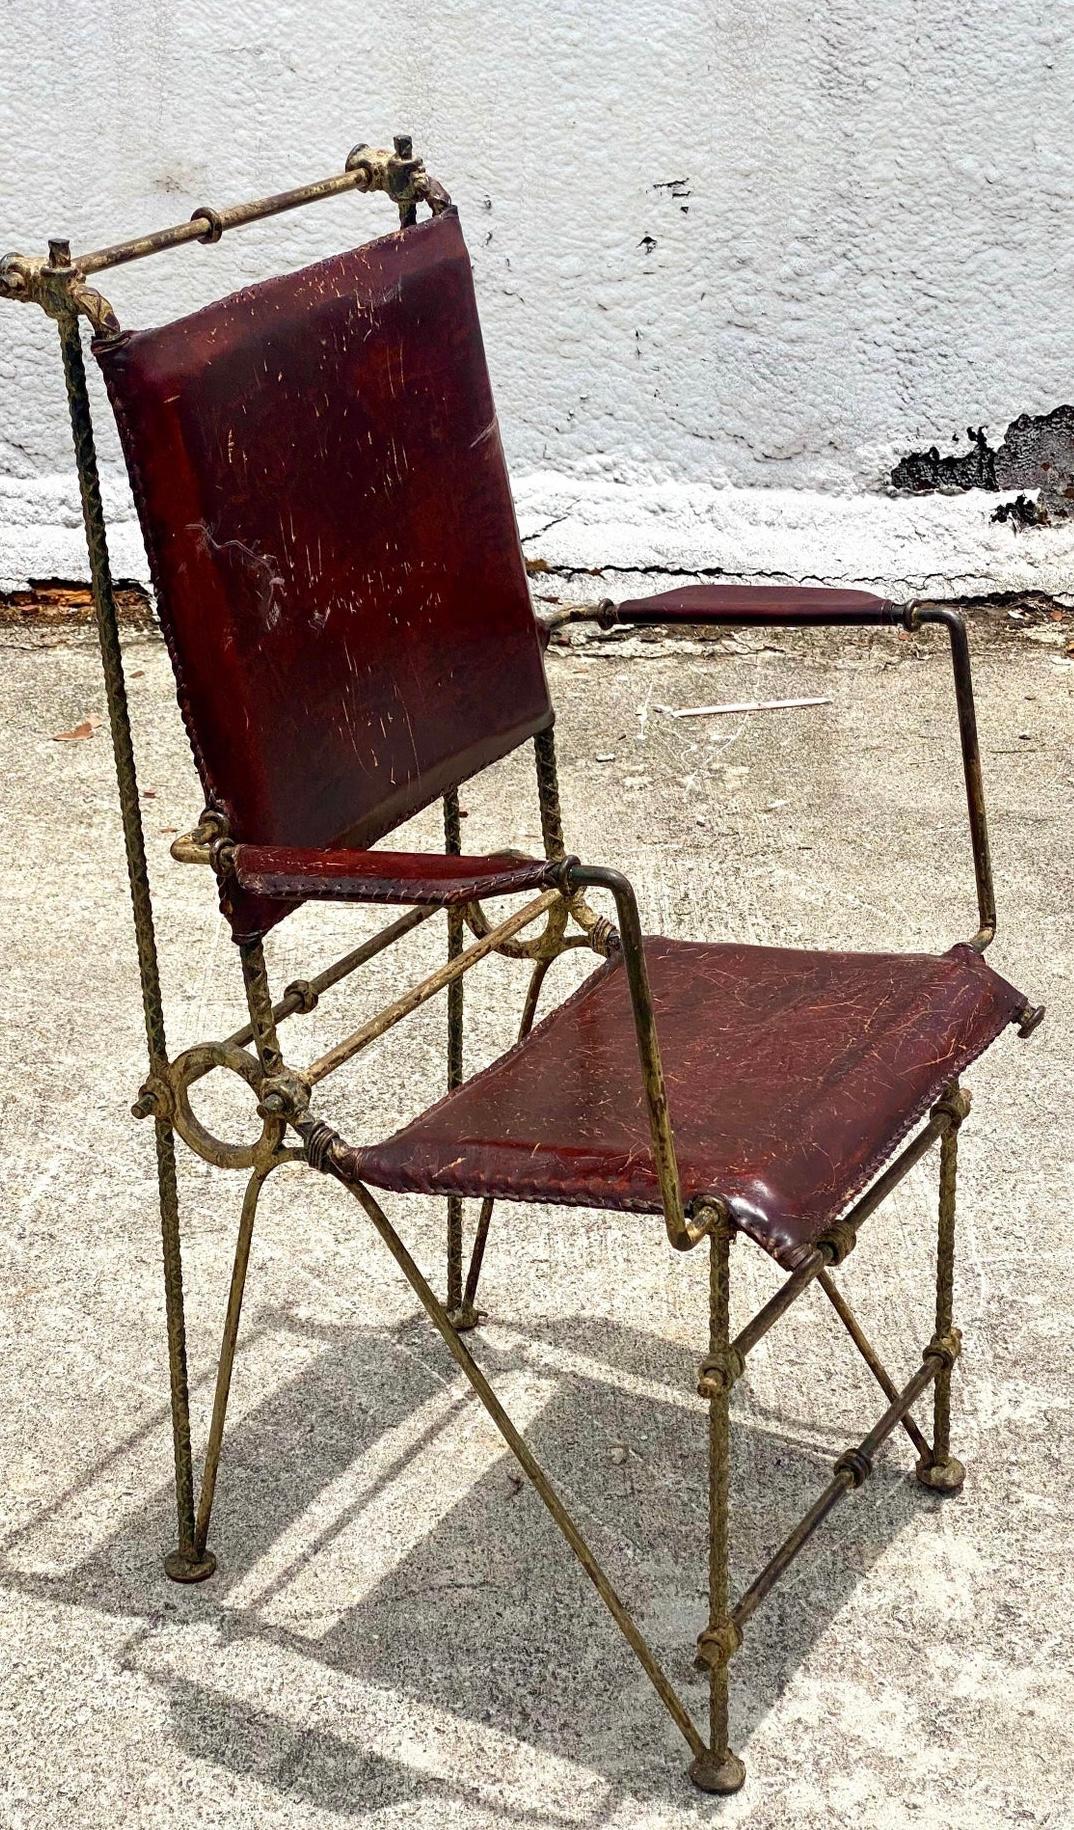 Striking vintage set of 6 Brutalist dining chairs. Made in the manner of Ilana Goor. Heavy distressed rebar sculpted into the most brilliant designs. Distressed leather seats. Acquired from a Palm Beach estate.